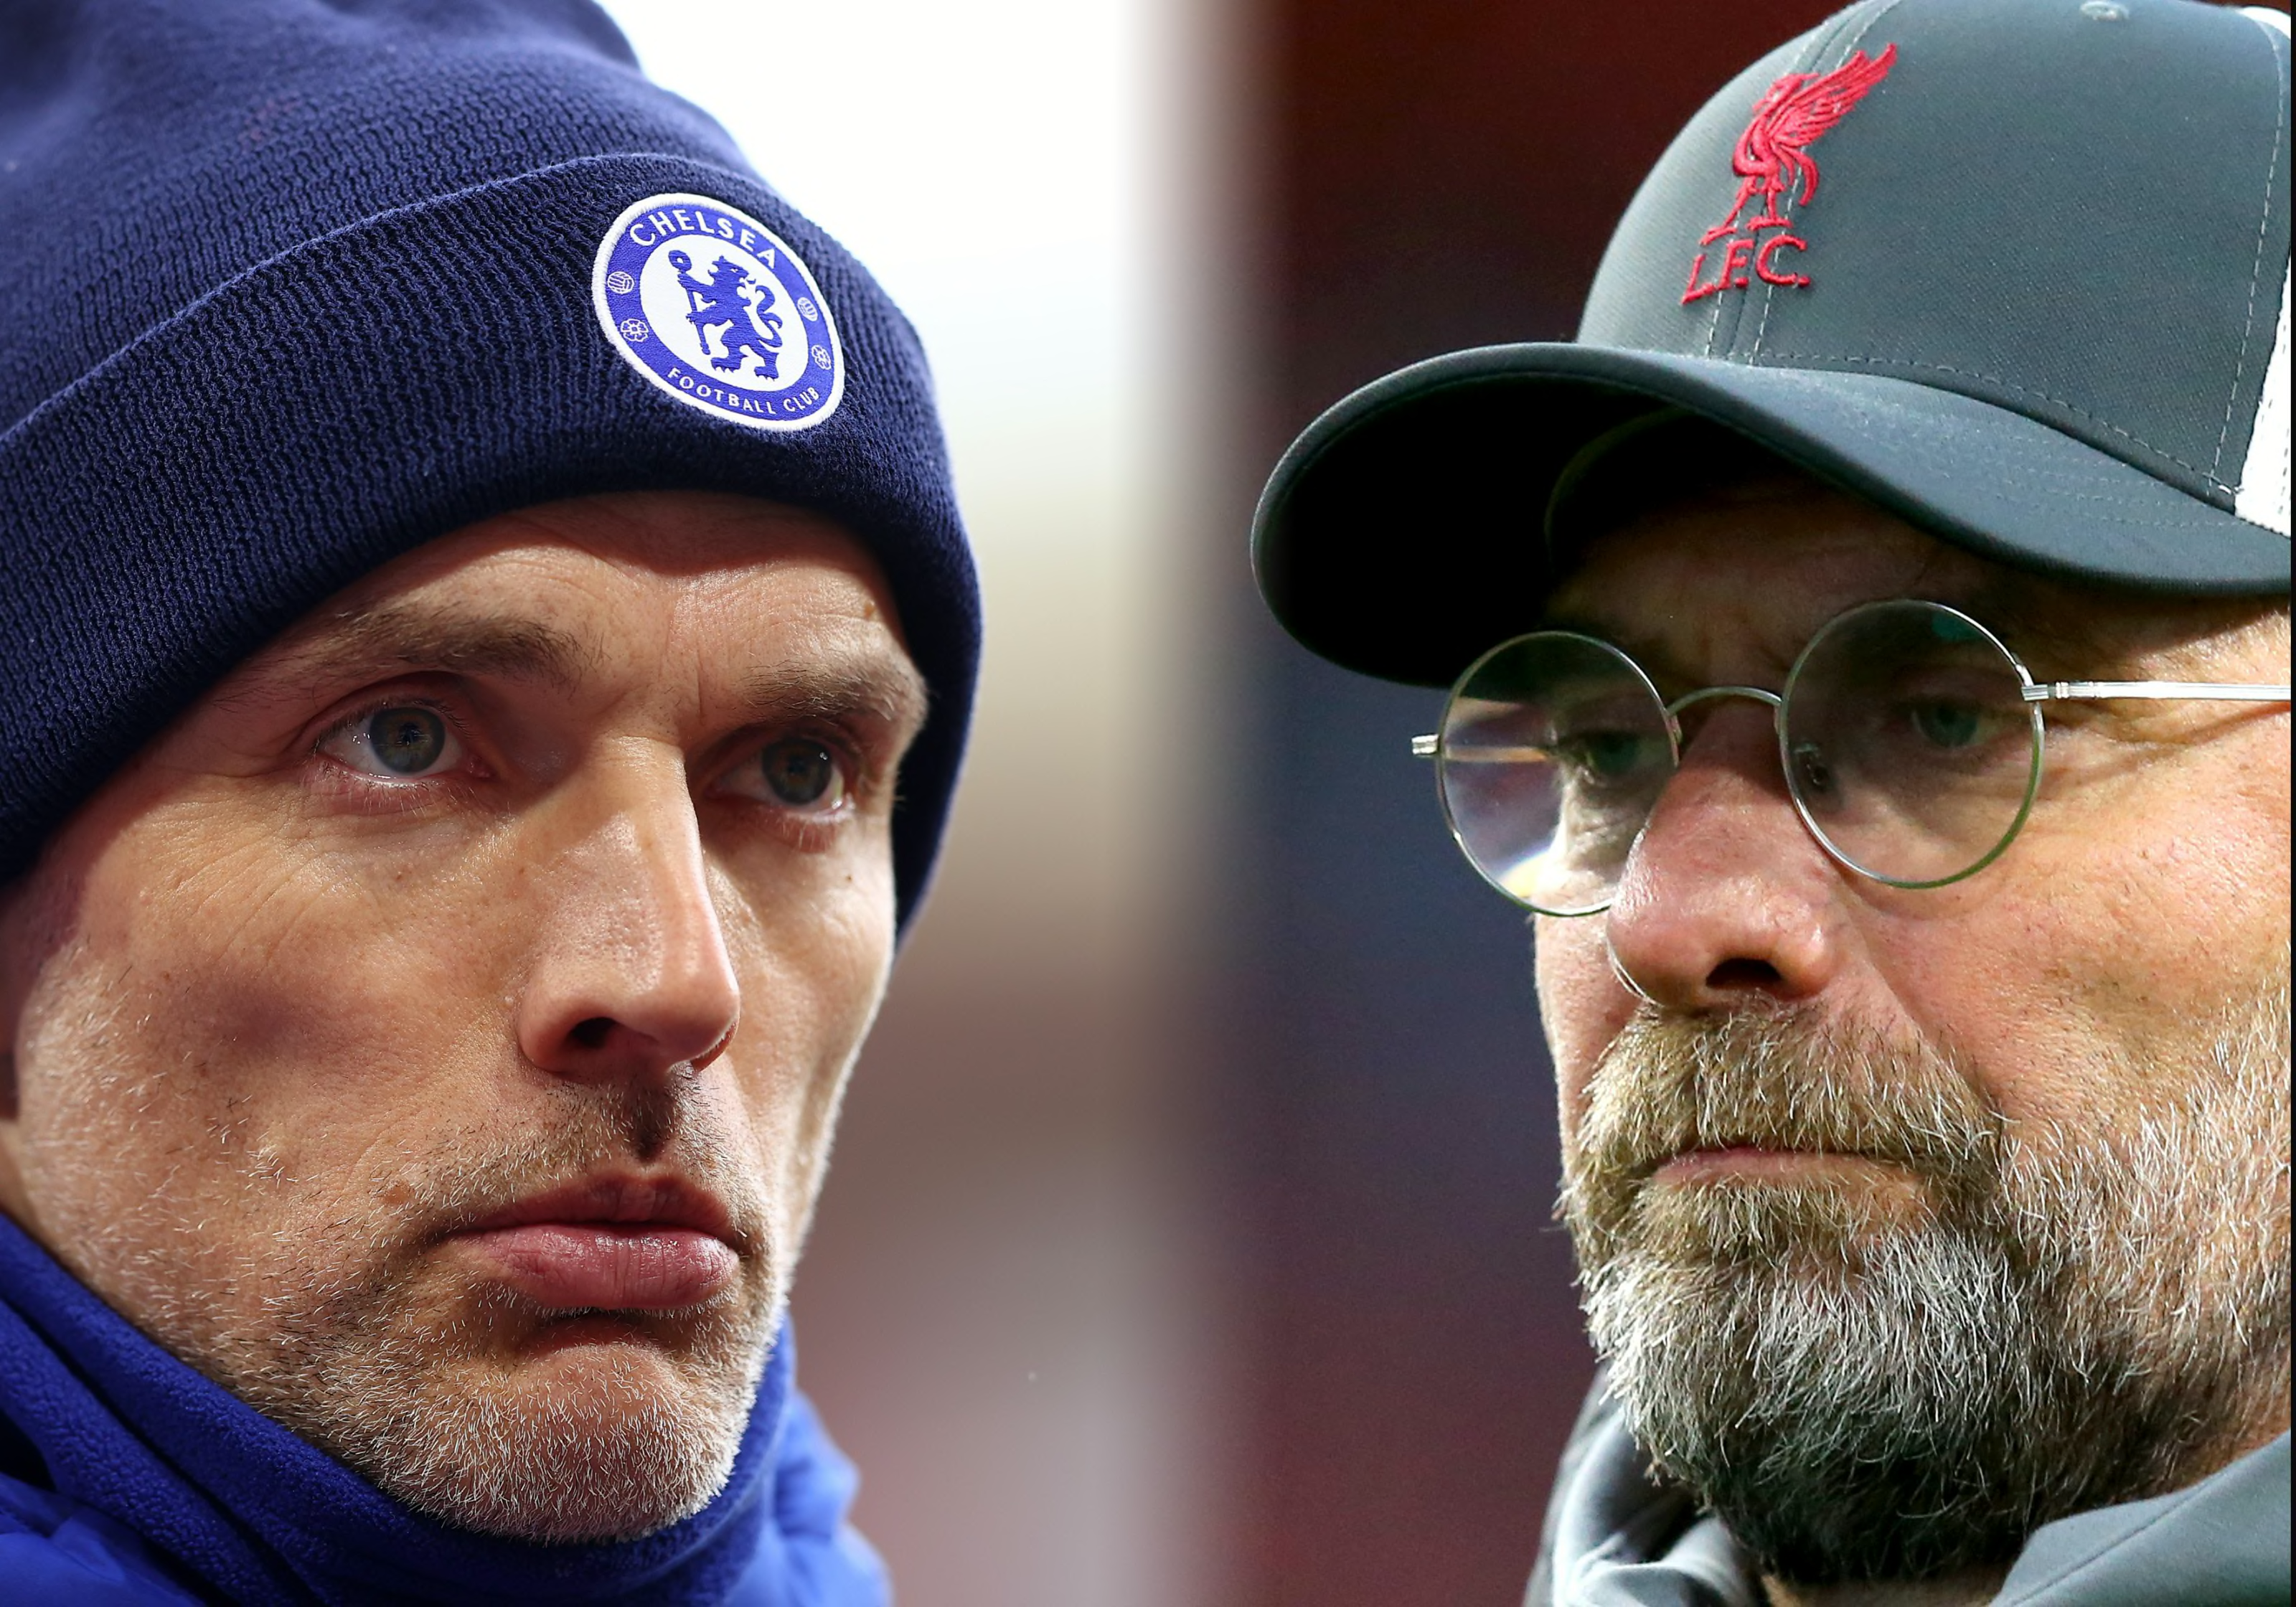 Liverpool vs Chelsea Three Carabao Cup final matchups to watch for